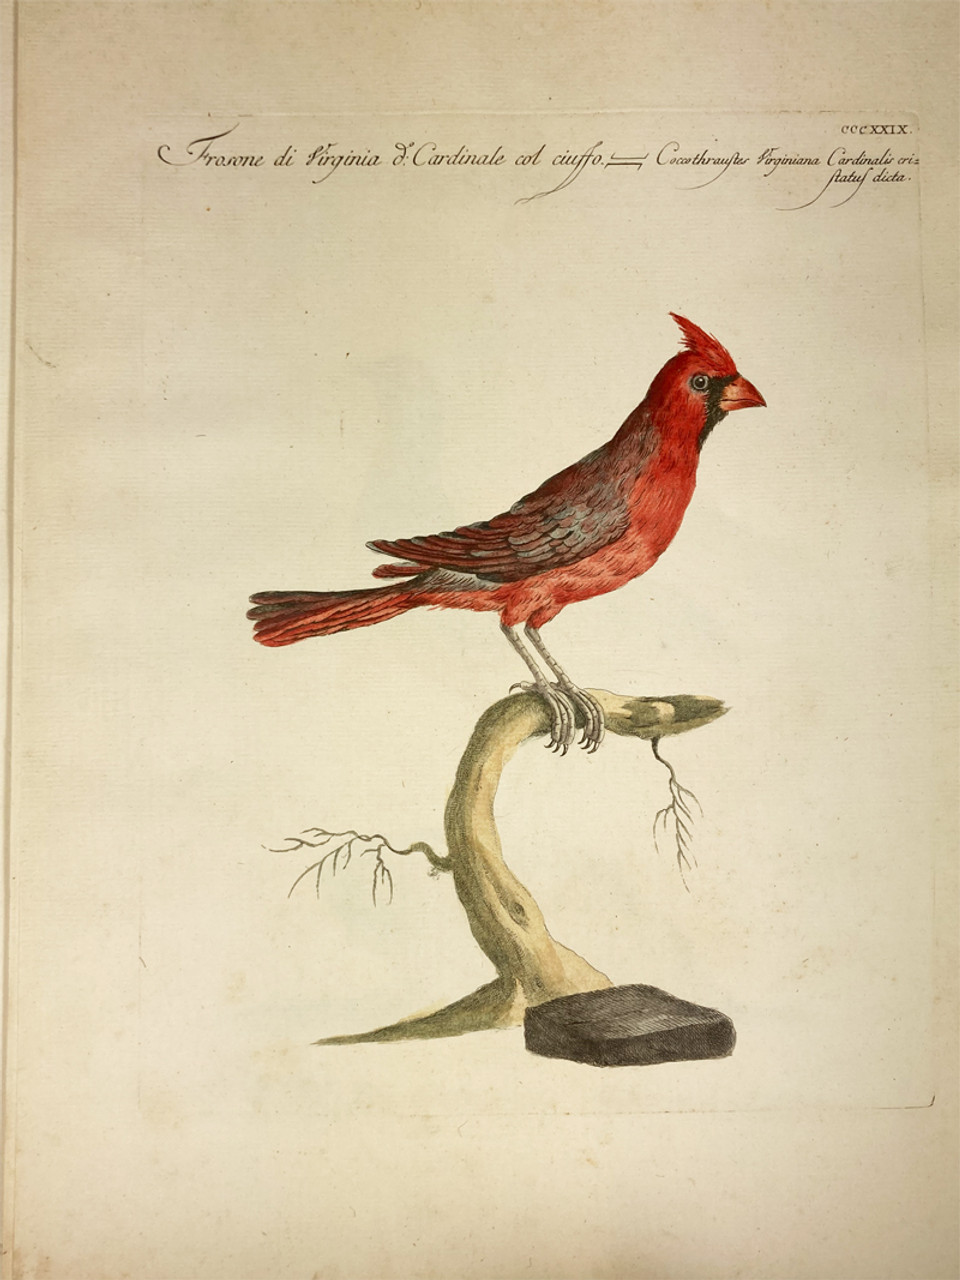 Cardinal by Saverio Manetti 1767-1776 Italy original watercolor copper plate engraving on rag paper antique print